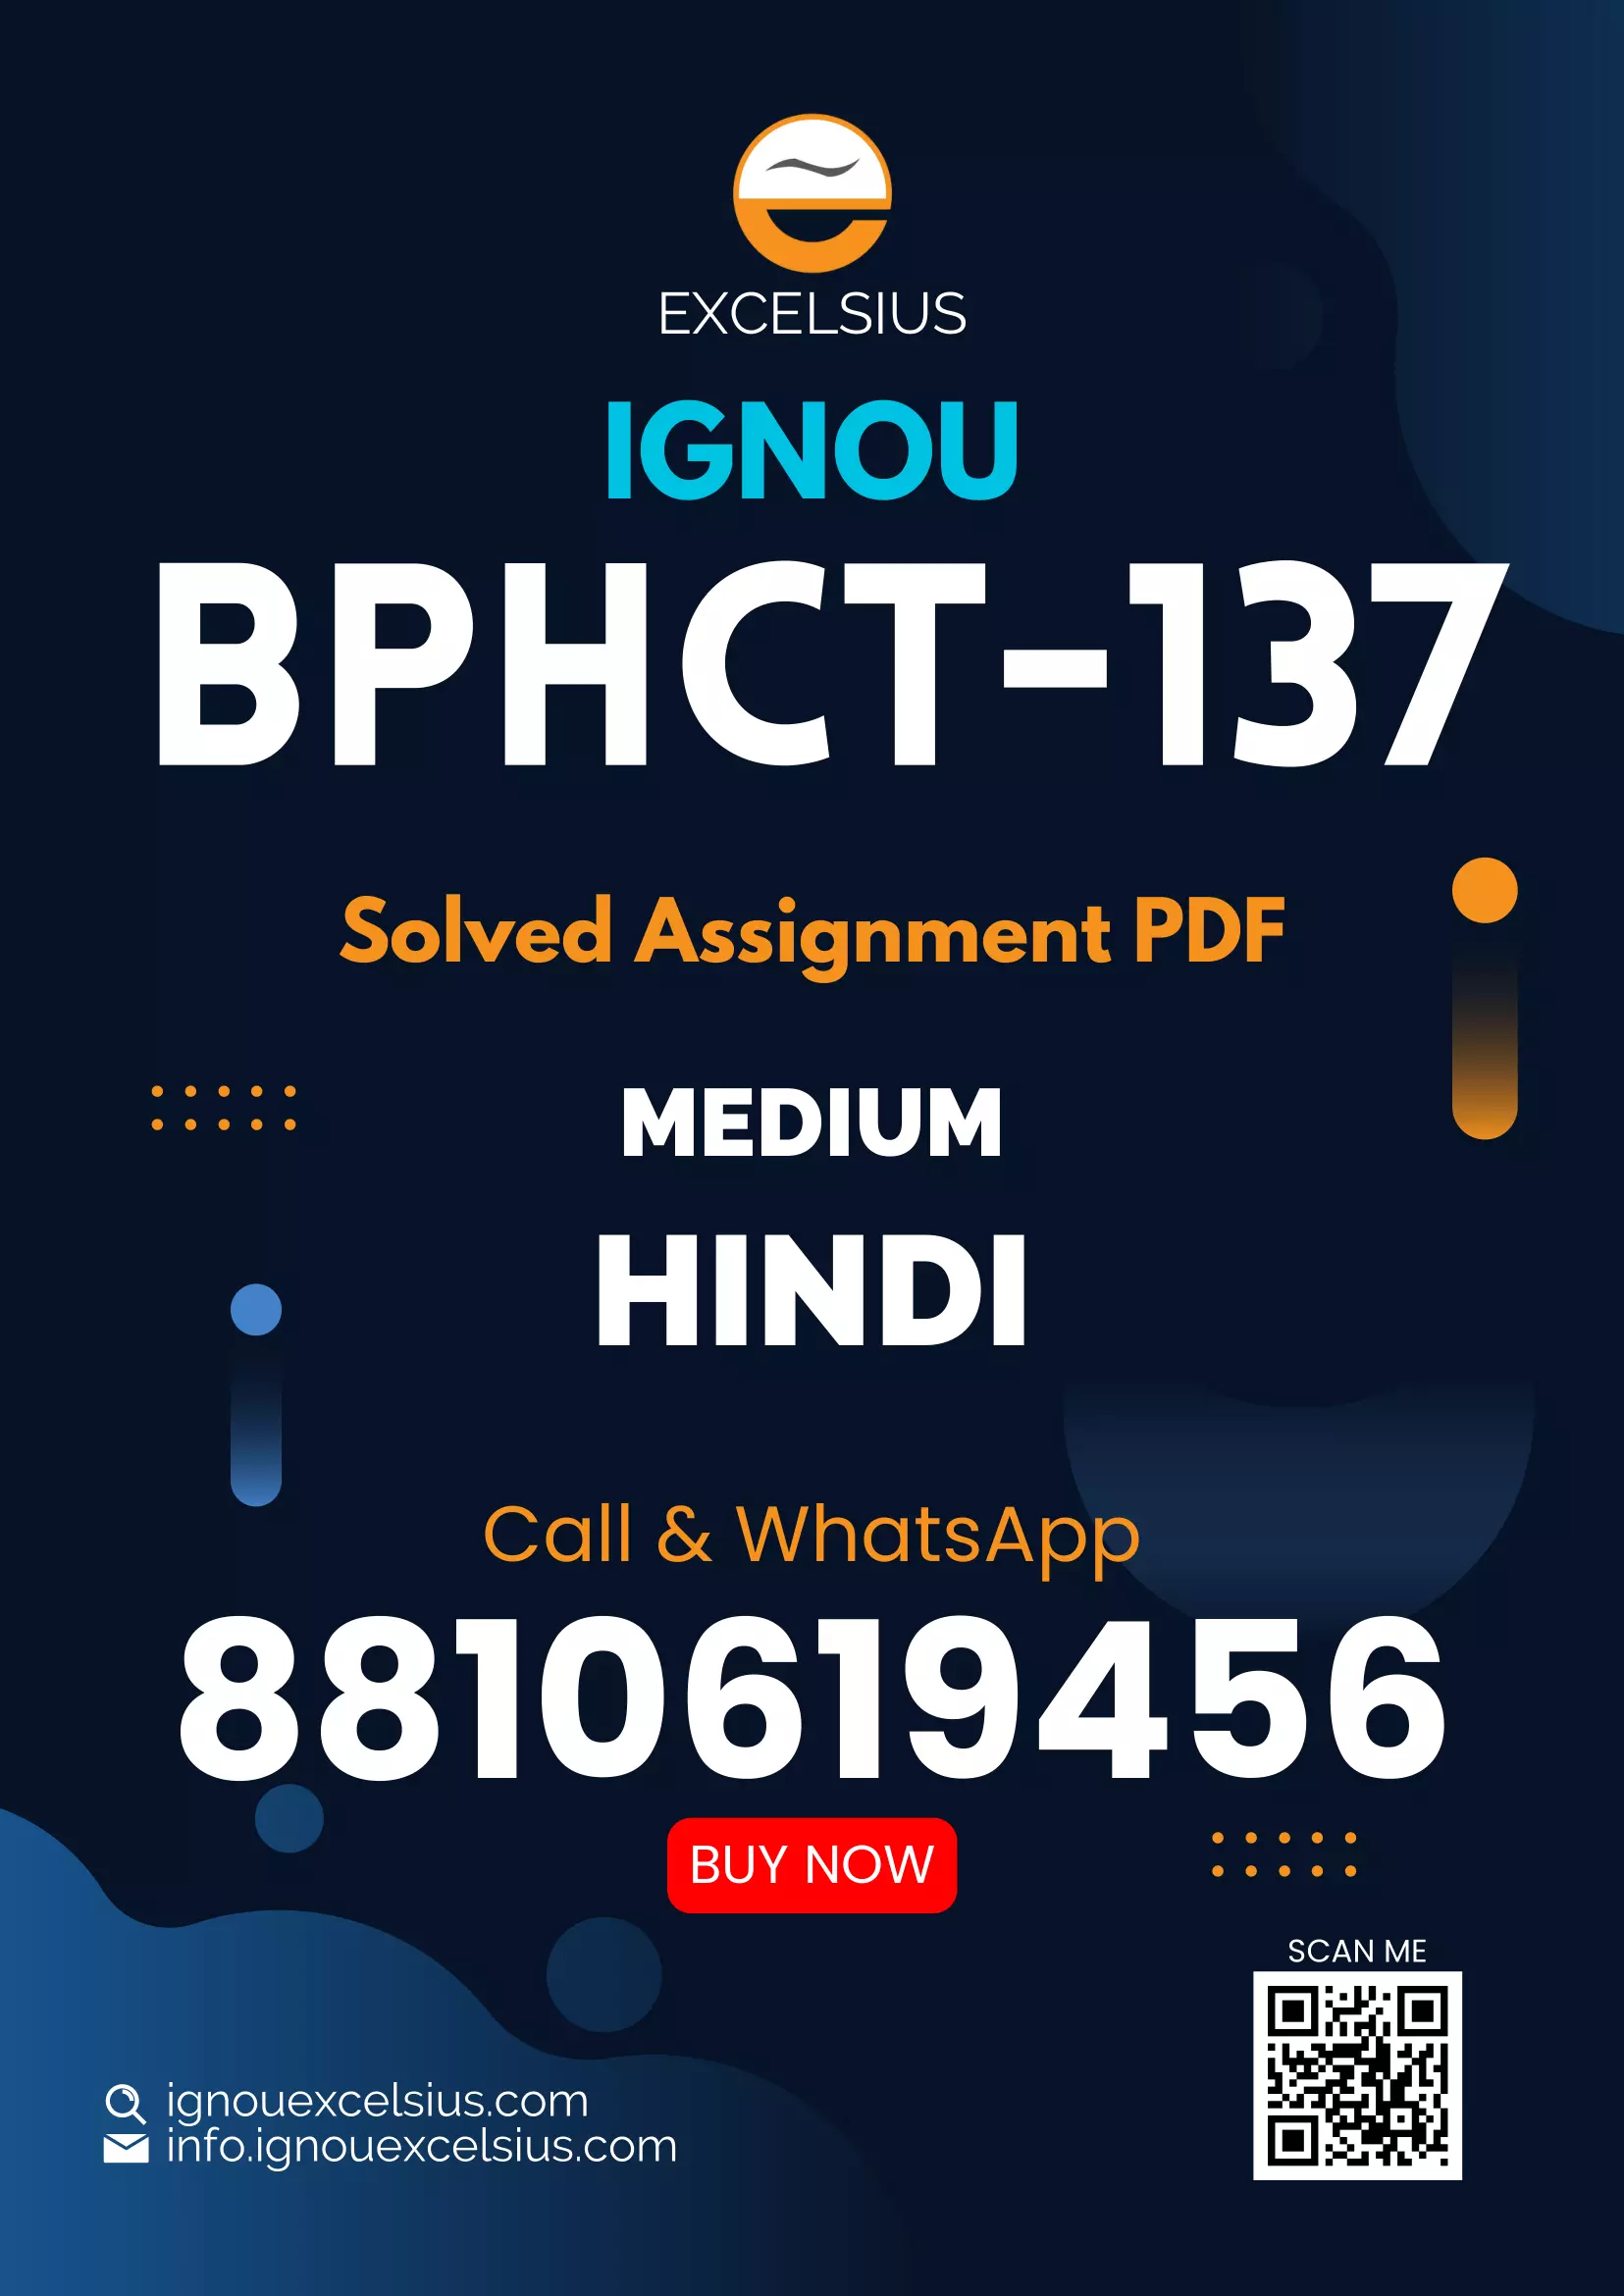 IGNOU BPHCT-137 - Wave and Optics, Latest Solved Assignment-January 2023 - December 2023